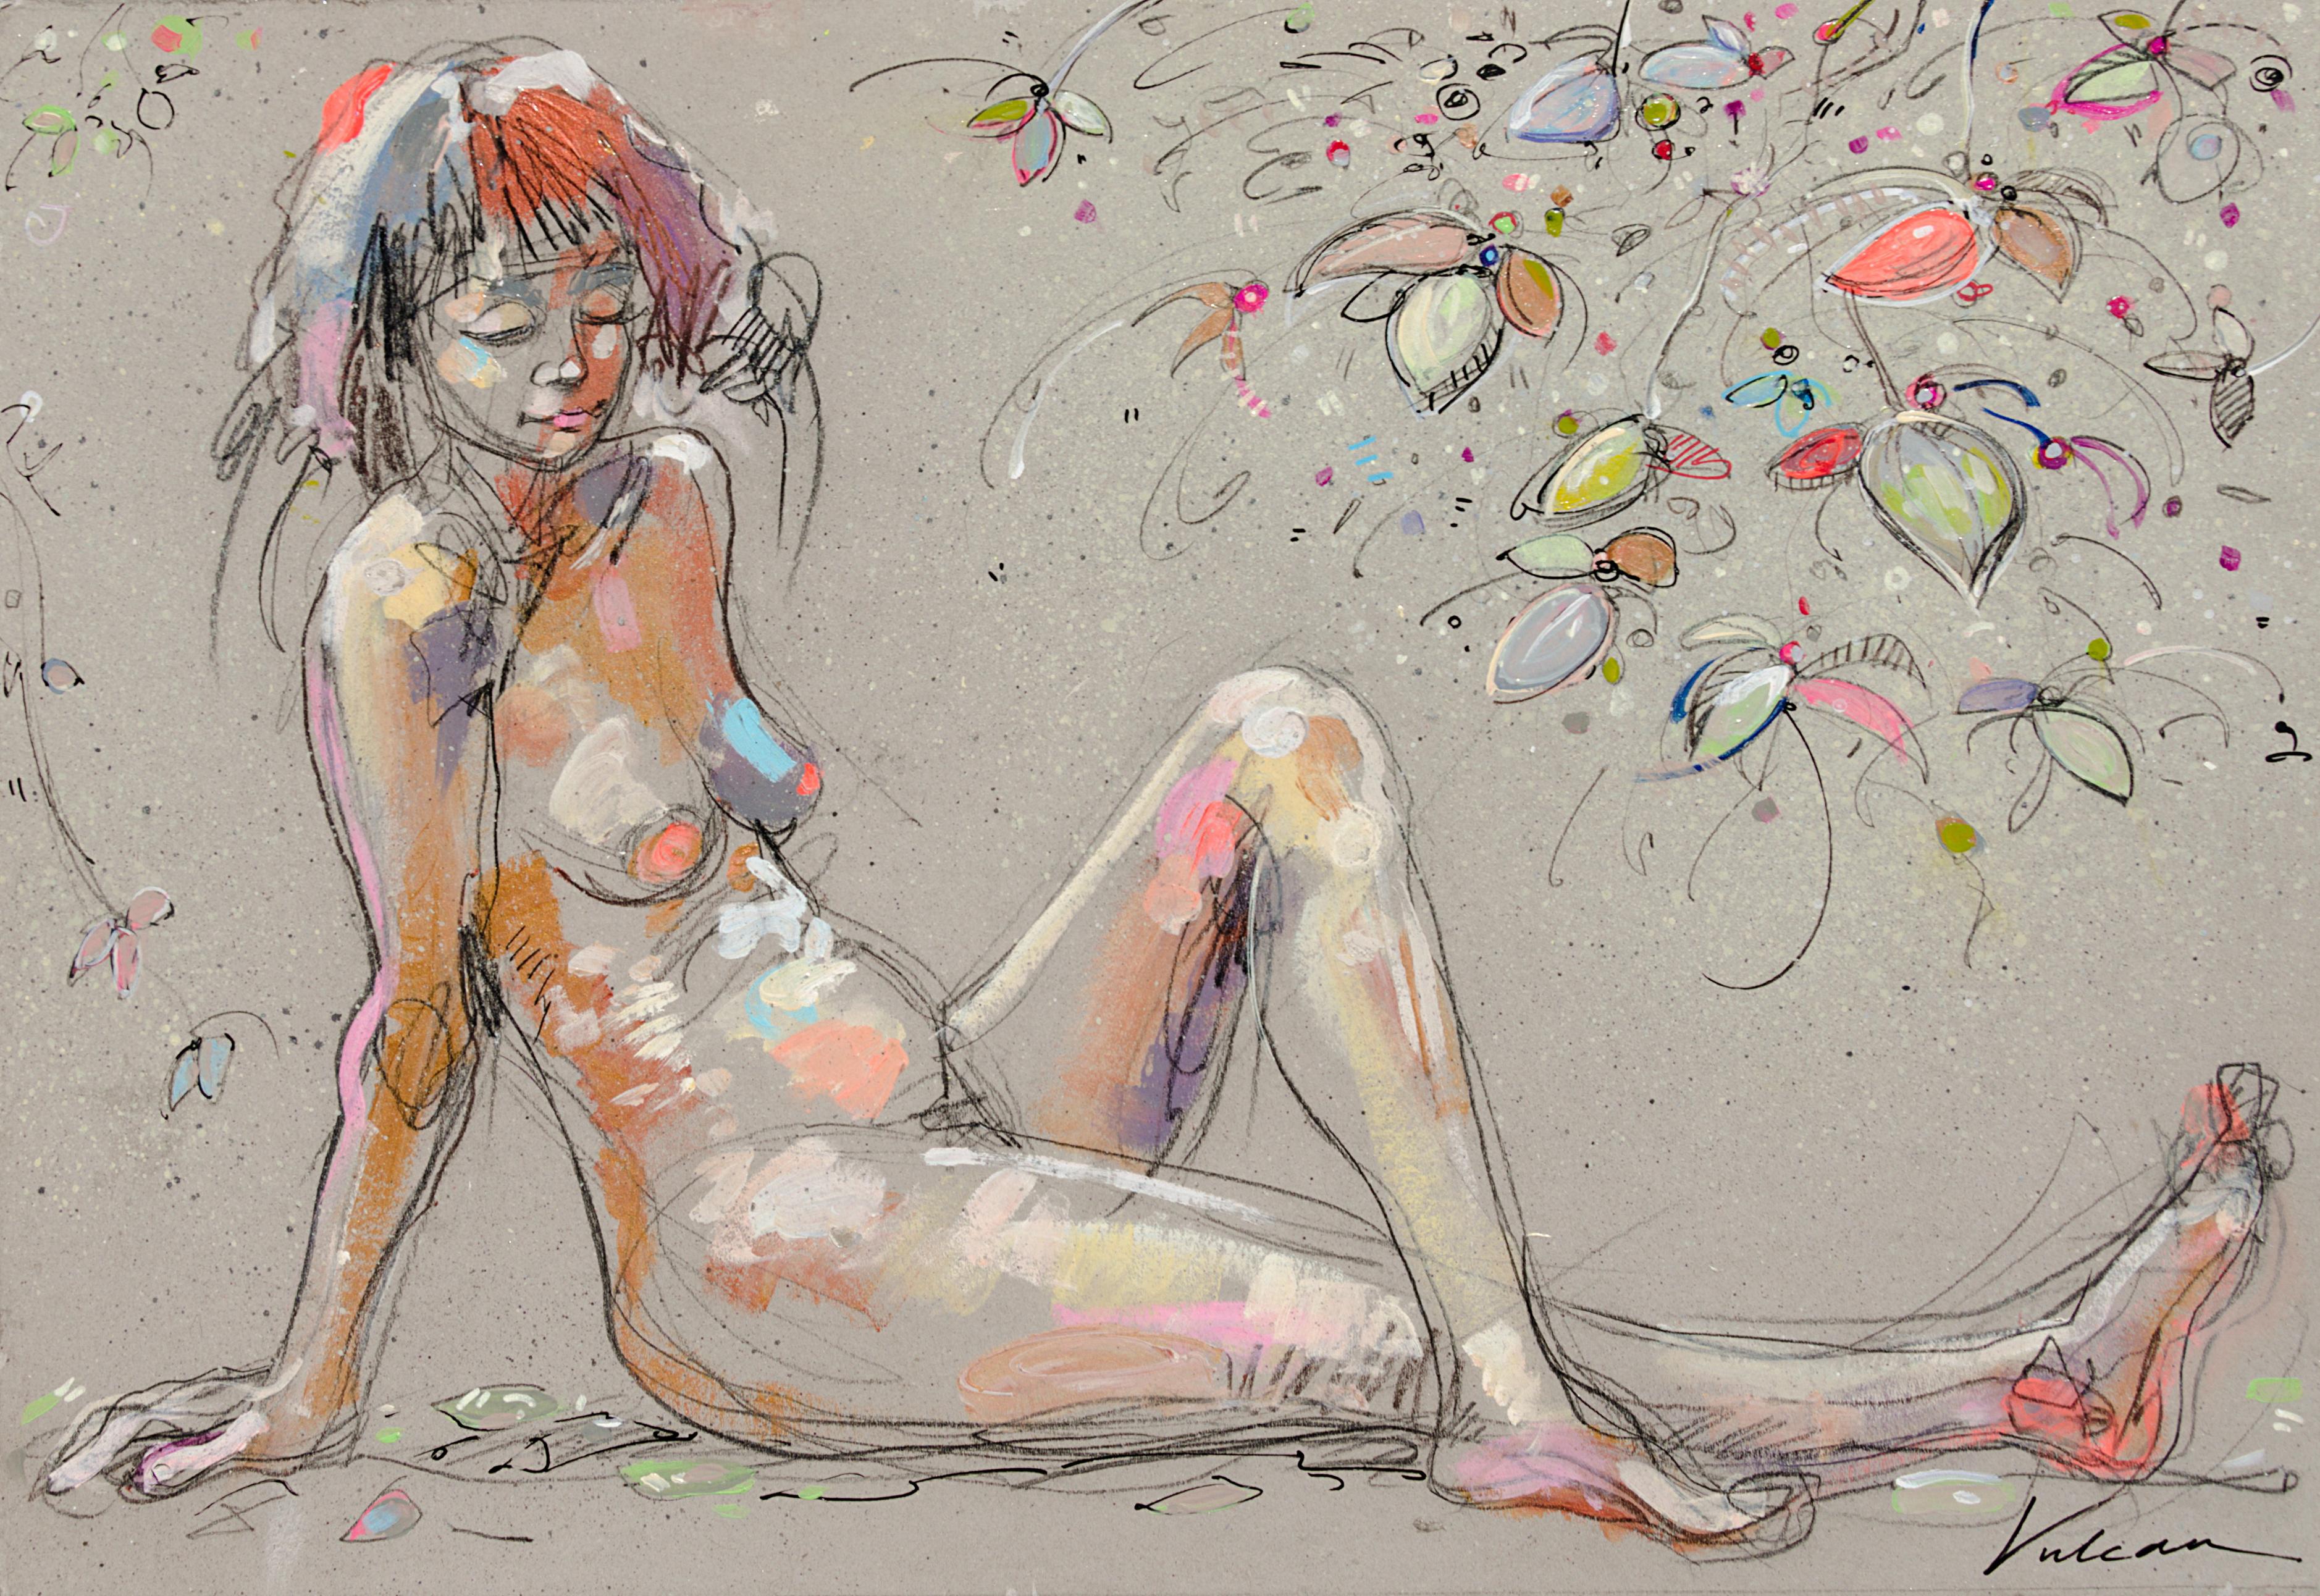 "Mischievous", Nude Woman Laying on Her Arms with Crossed Legs and Flowers